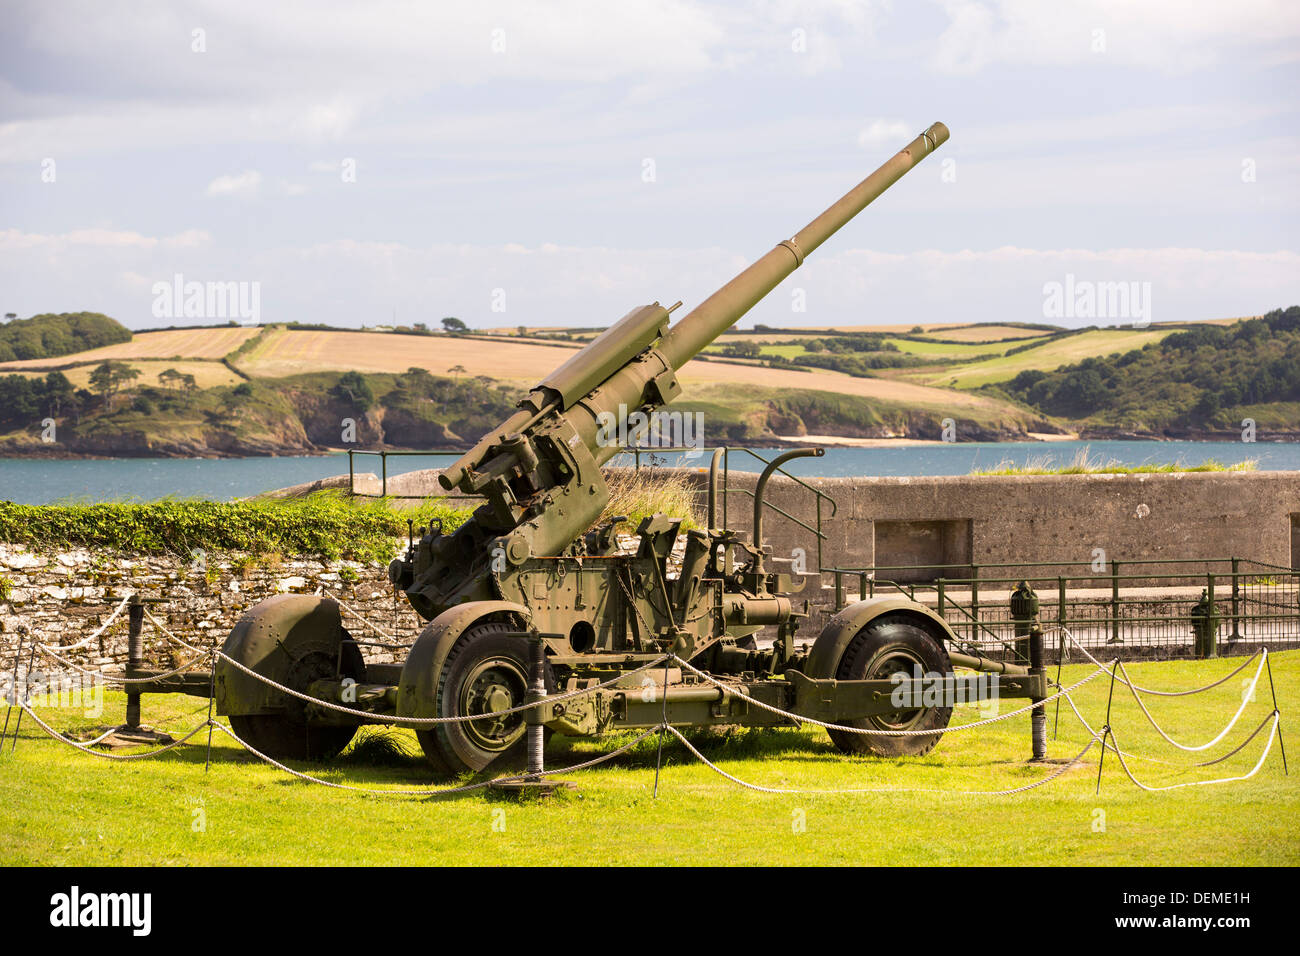 Artillery at Pendennis Castle, a fortress that has protected Cornwall from invasion for 450 years, Falmouth, UK. Stock Photo